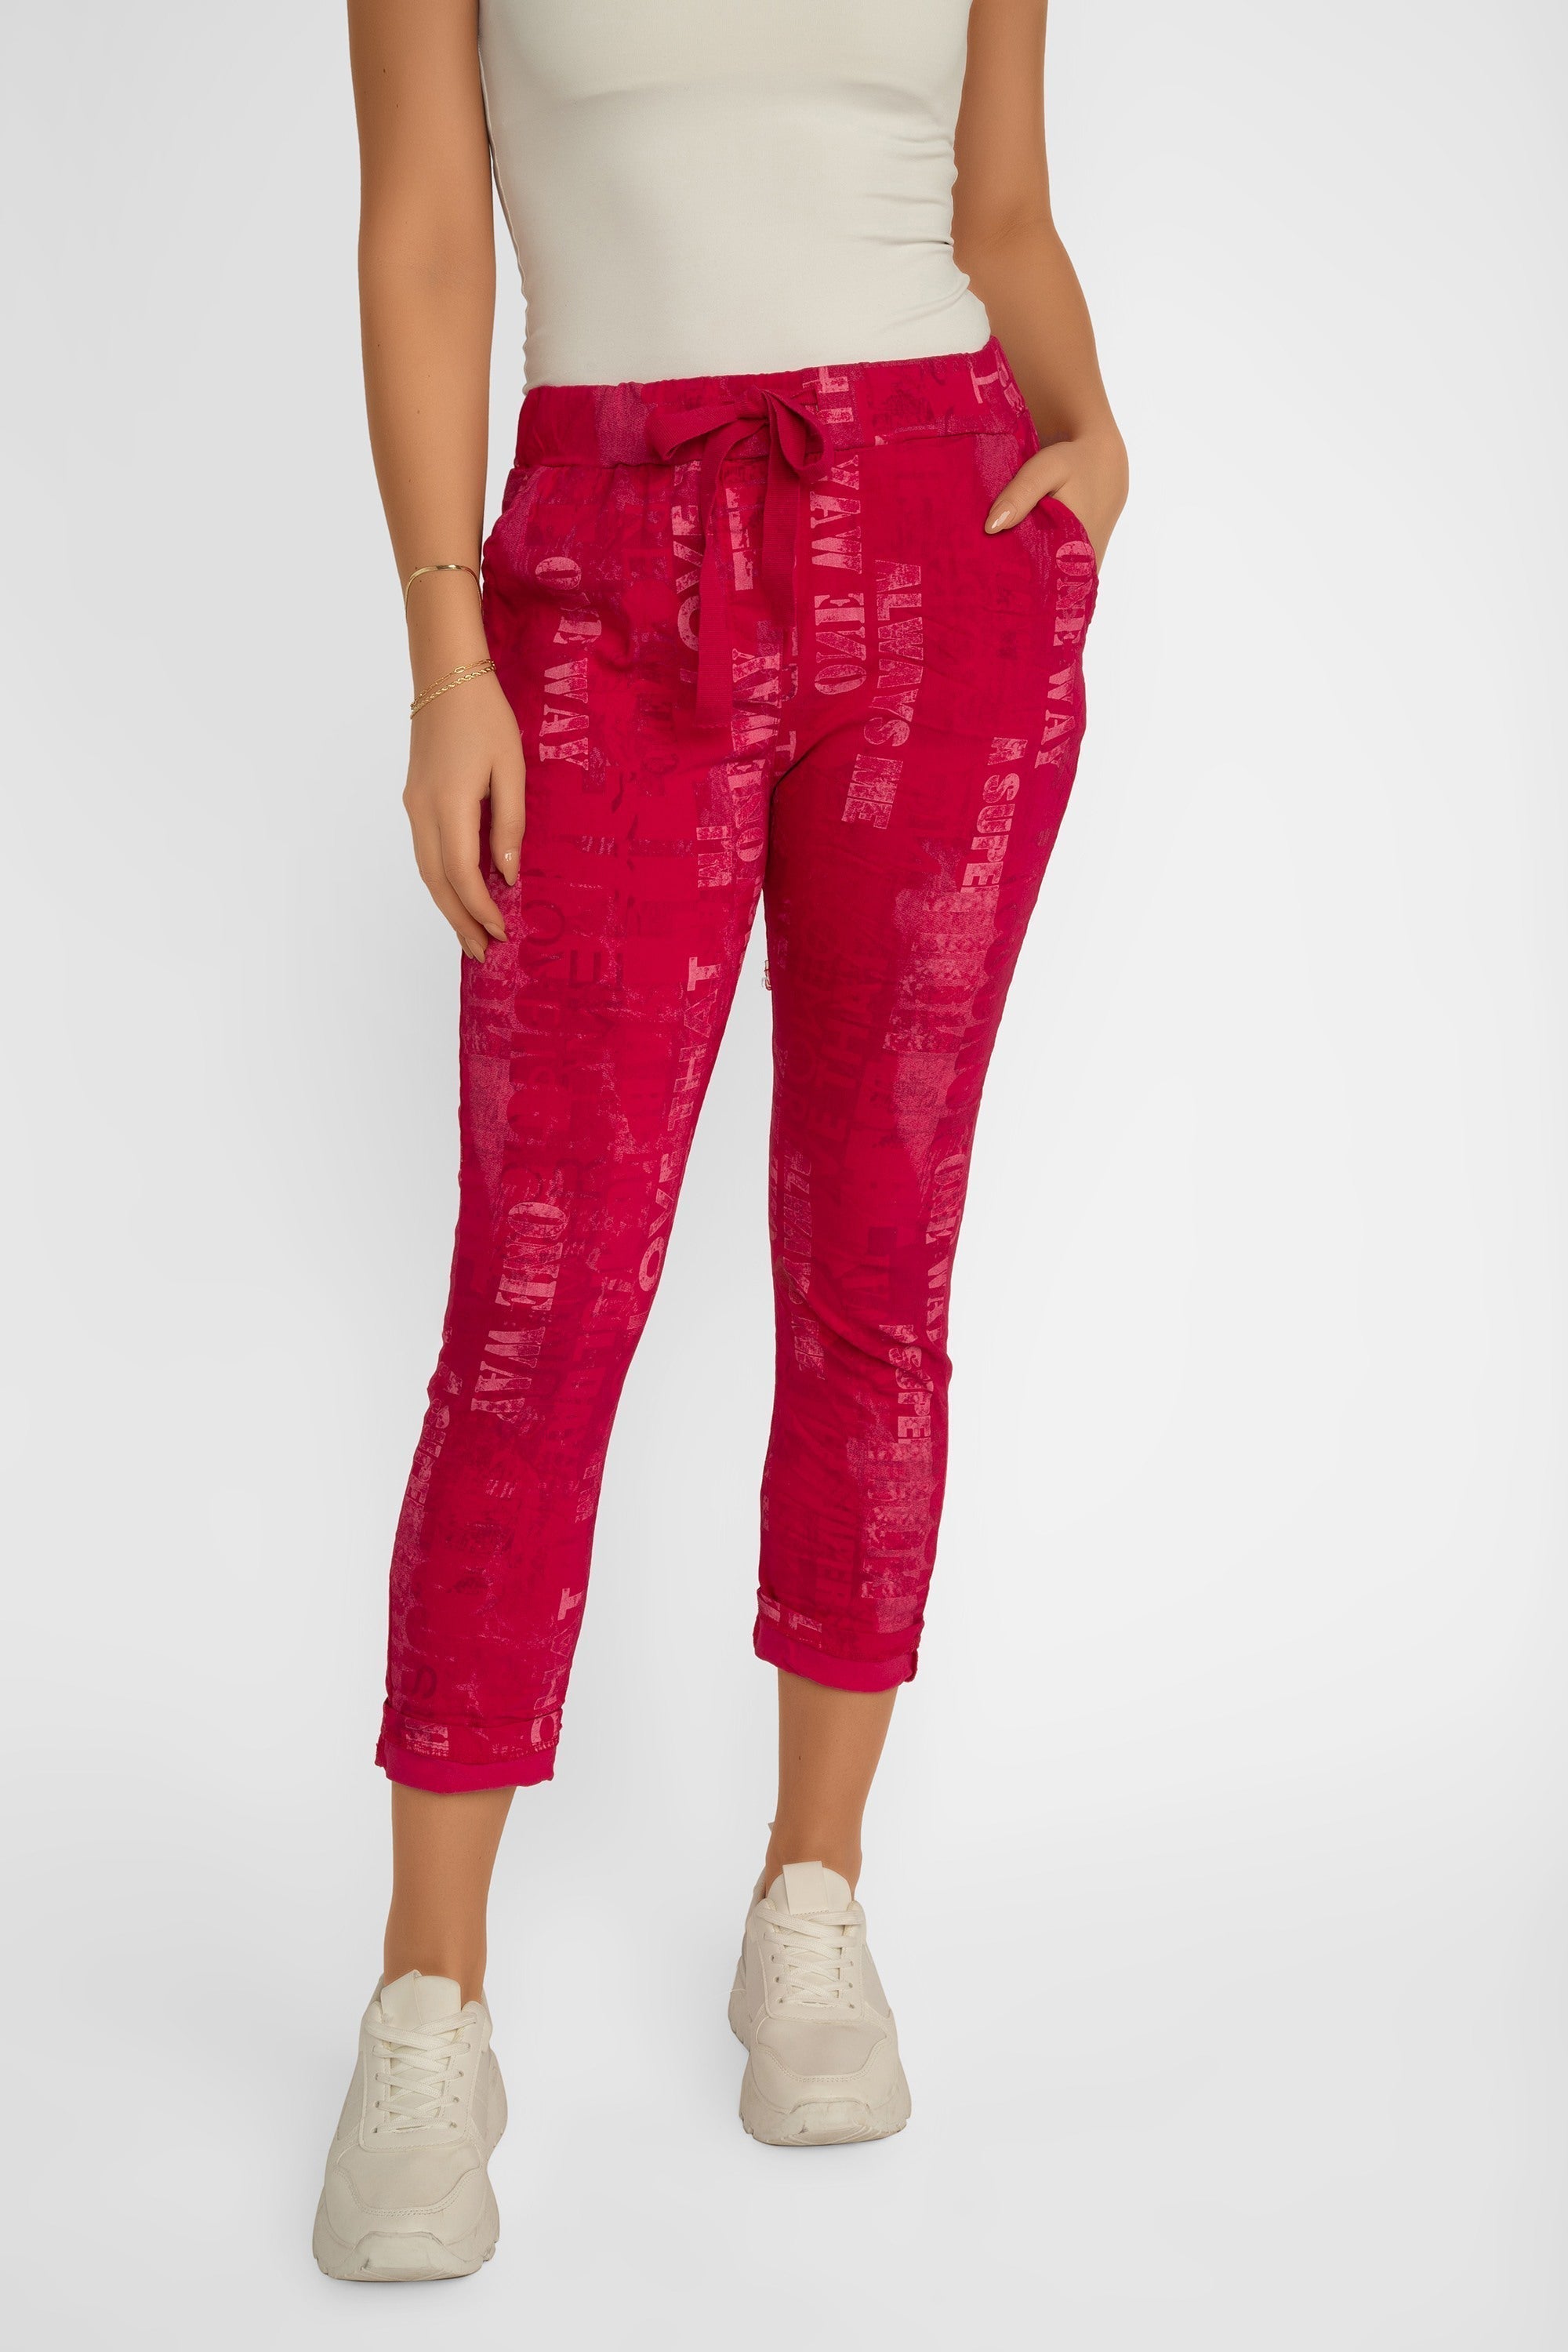 Frotn view of Elissia (L21026) Women's Pink Font Print Slim Fit, Cropped Crinkle Pants in Fuchsia